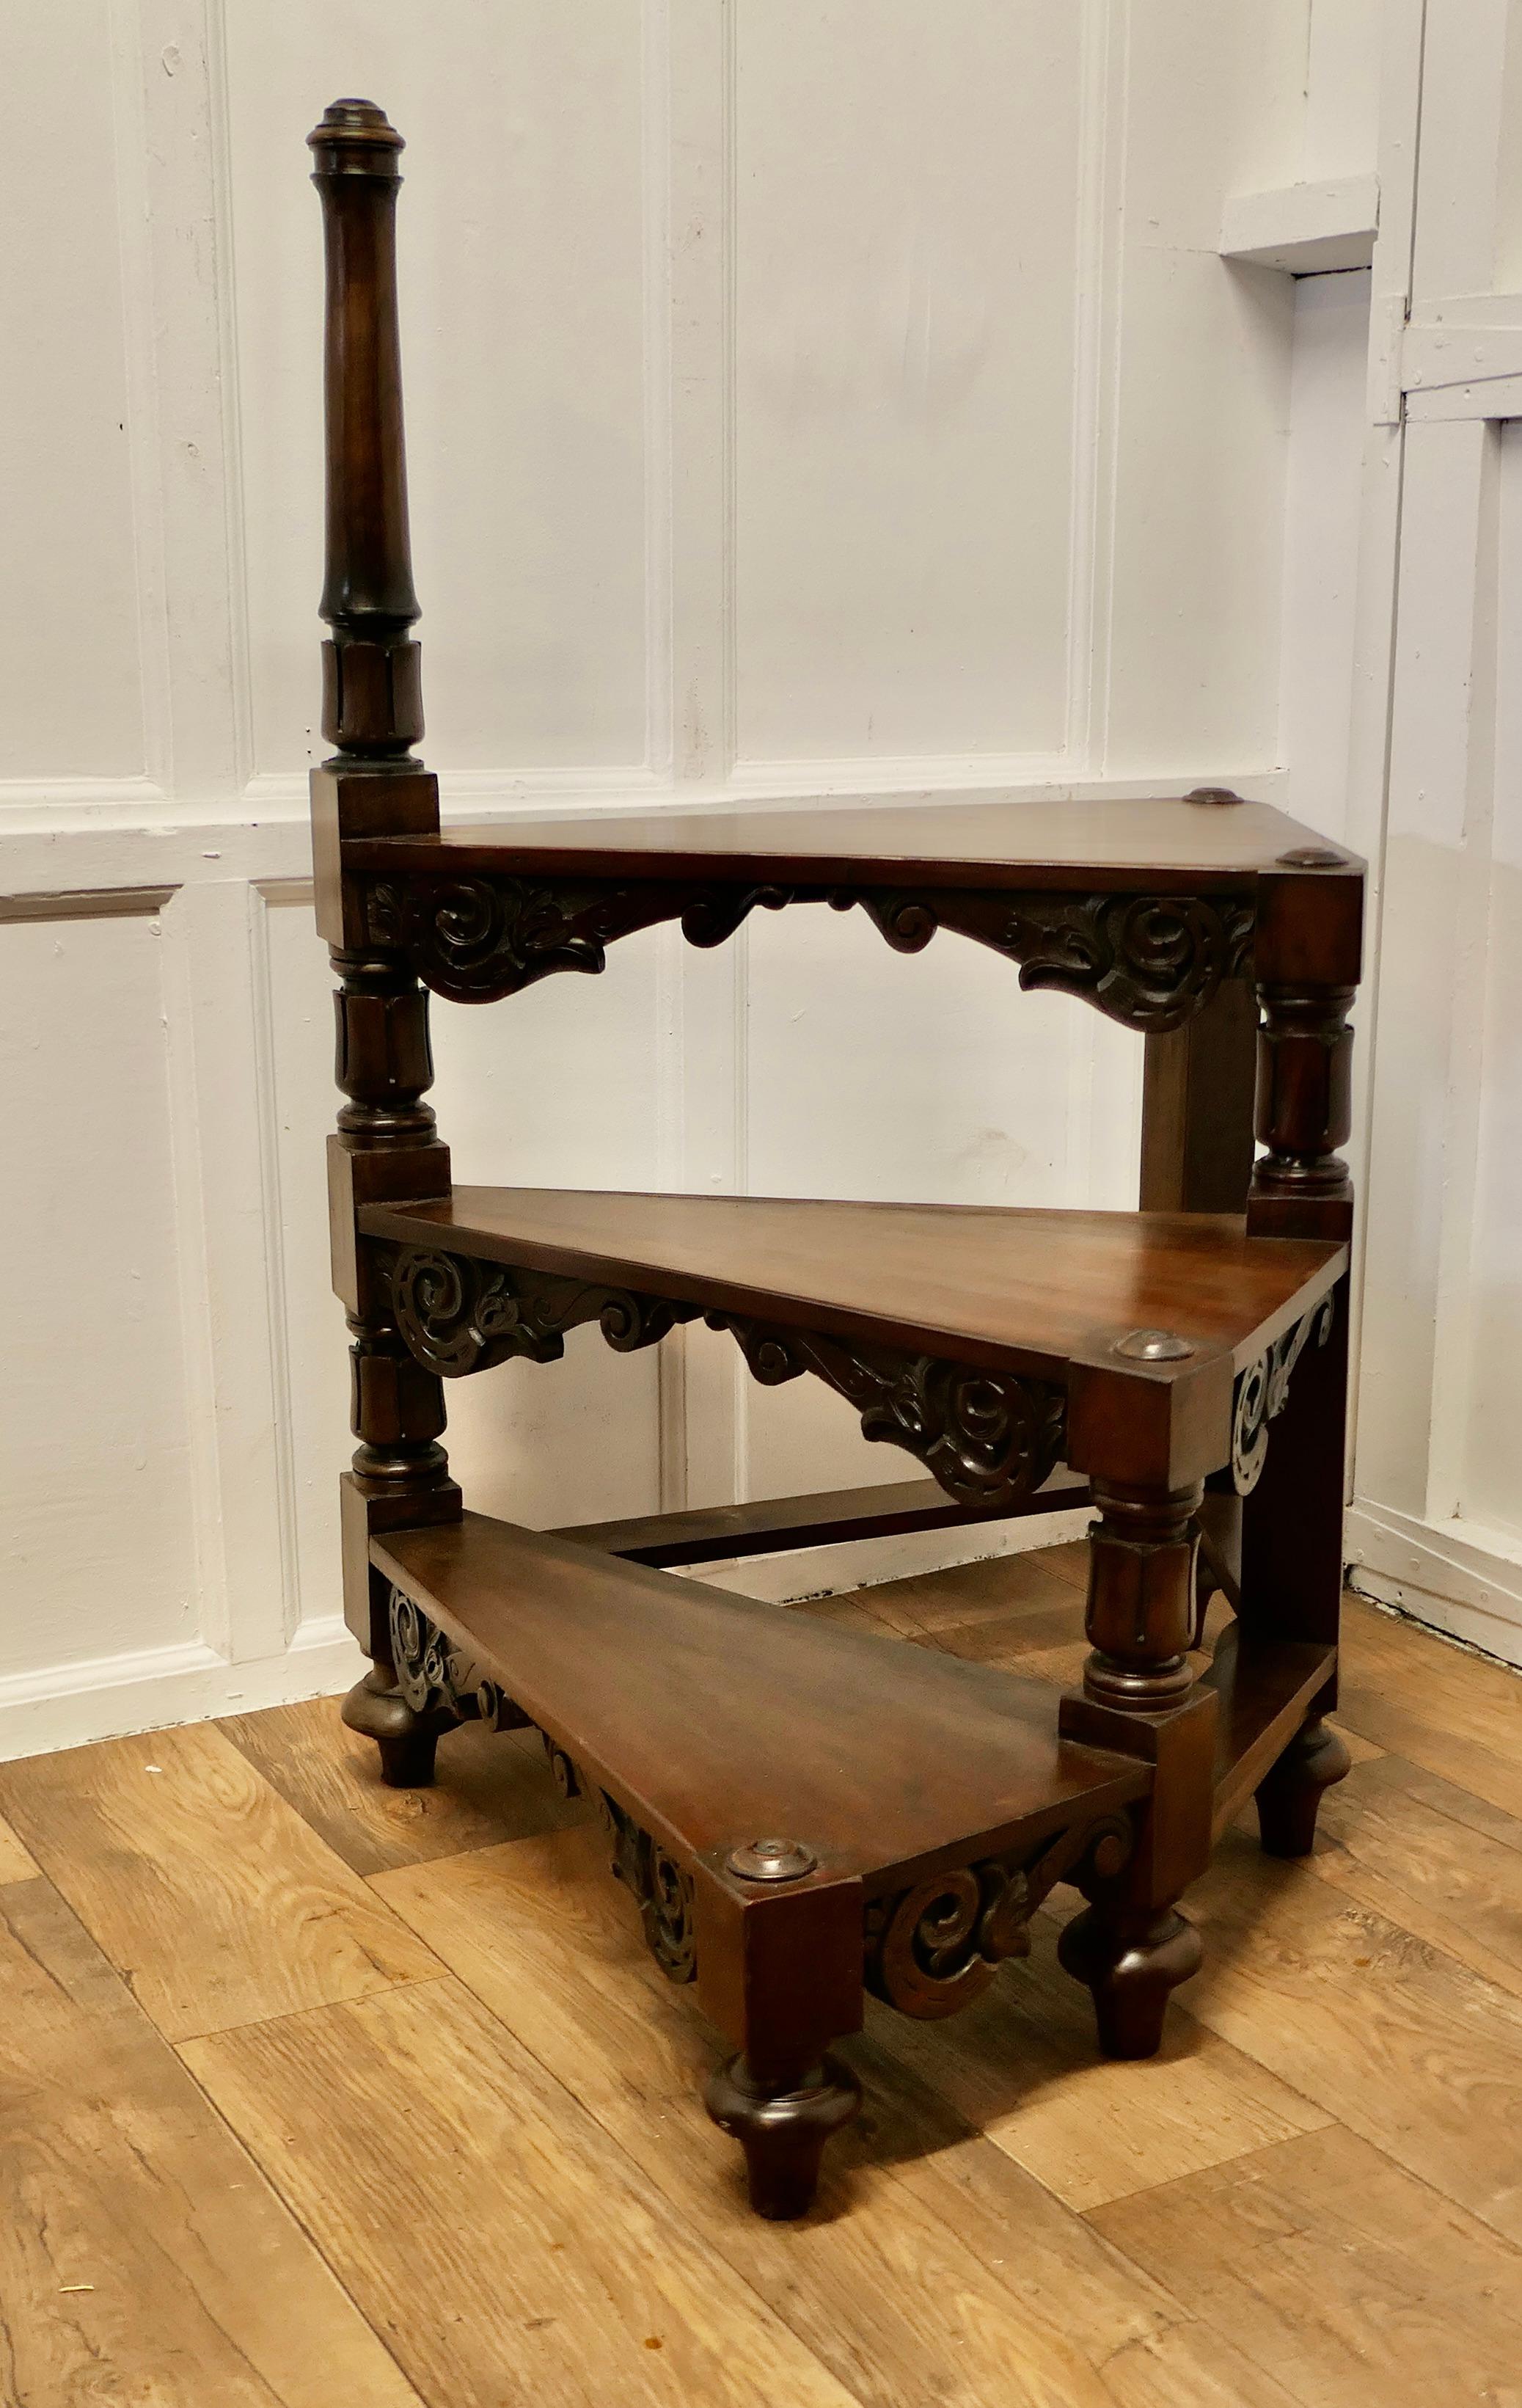 Heavy Victorian Spiral Library Steps with Turned Supports

A Great set of Library Steps, the 3 steps are in a spiral formation, they are in good condition, very sturdy and very useful

An attractive and unusual piece, the step is 49” high overall